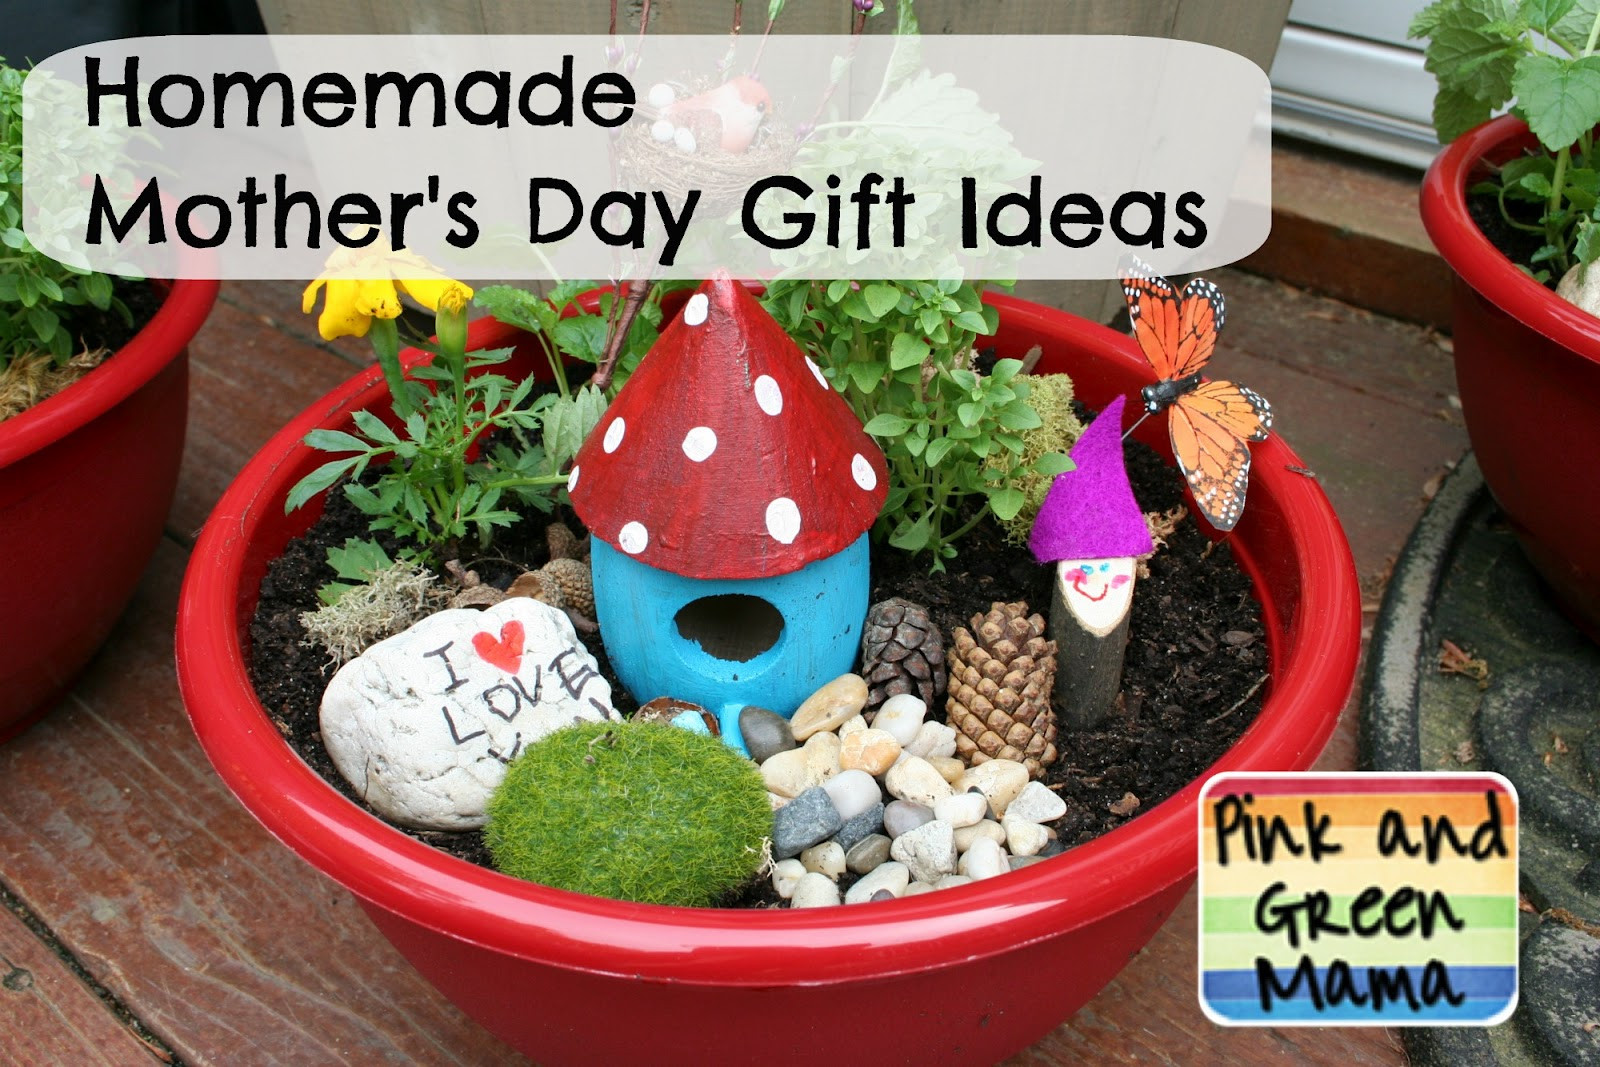 Homemade Mother Day Gift Ideas
 Pink and Green Mama Homemade Mother s Day Gift Ideas